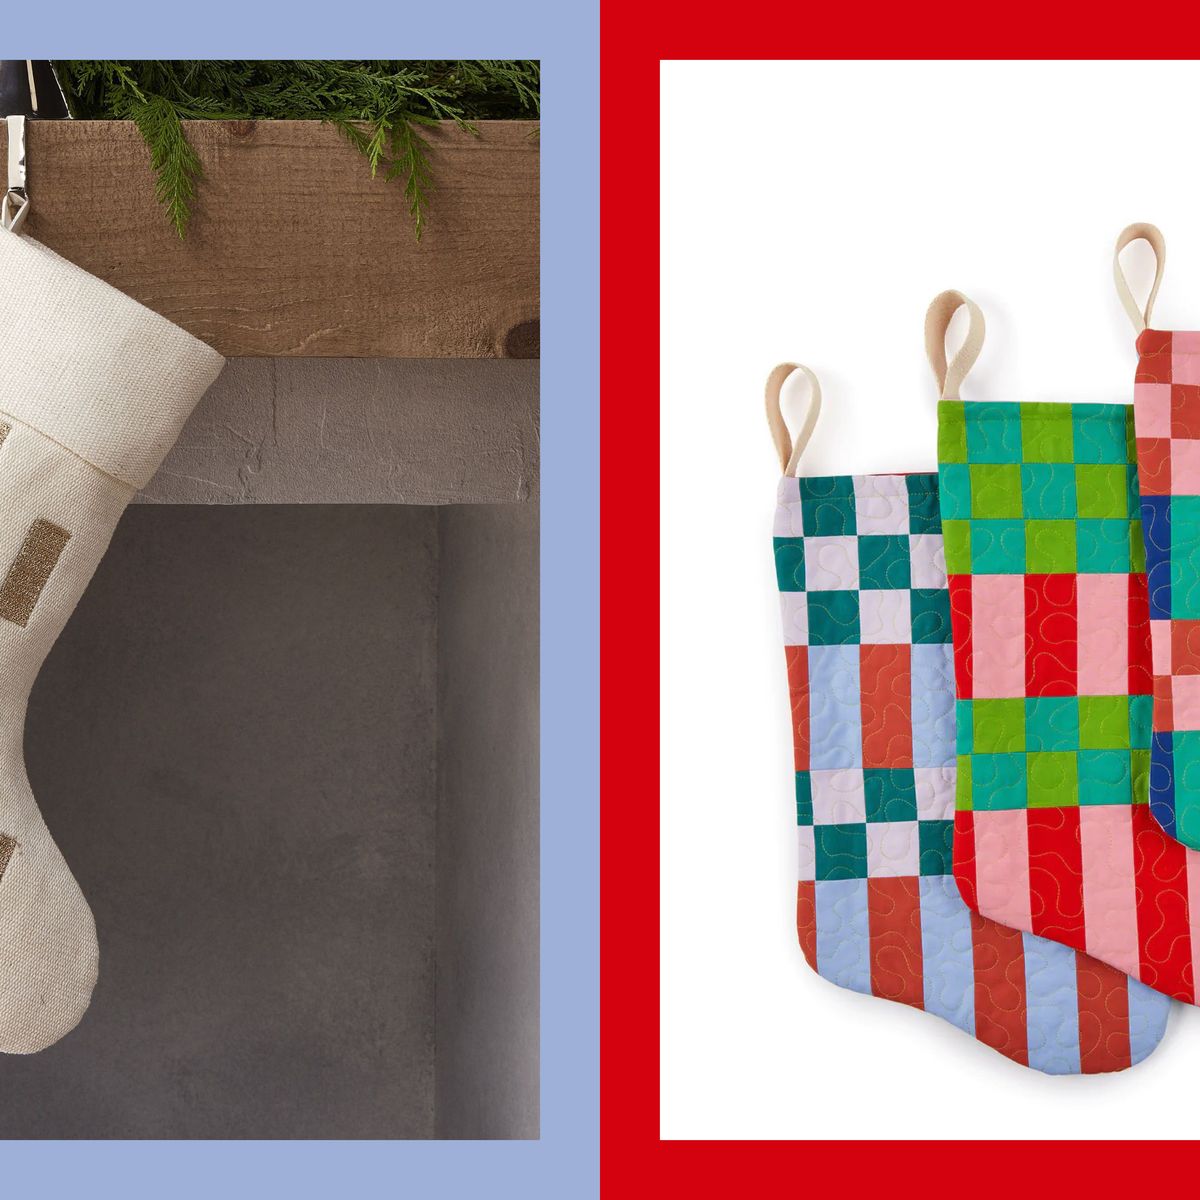 The 20 Best Christmas Stockings to Adorn Your Mantel in Style This